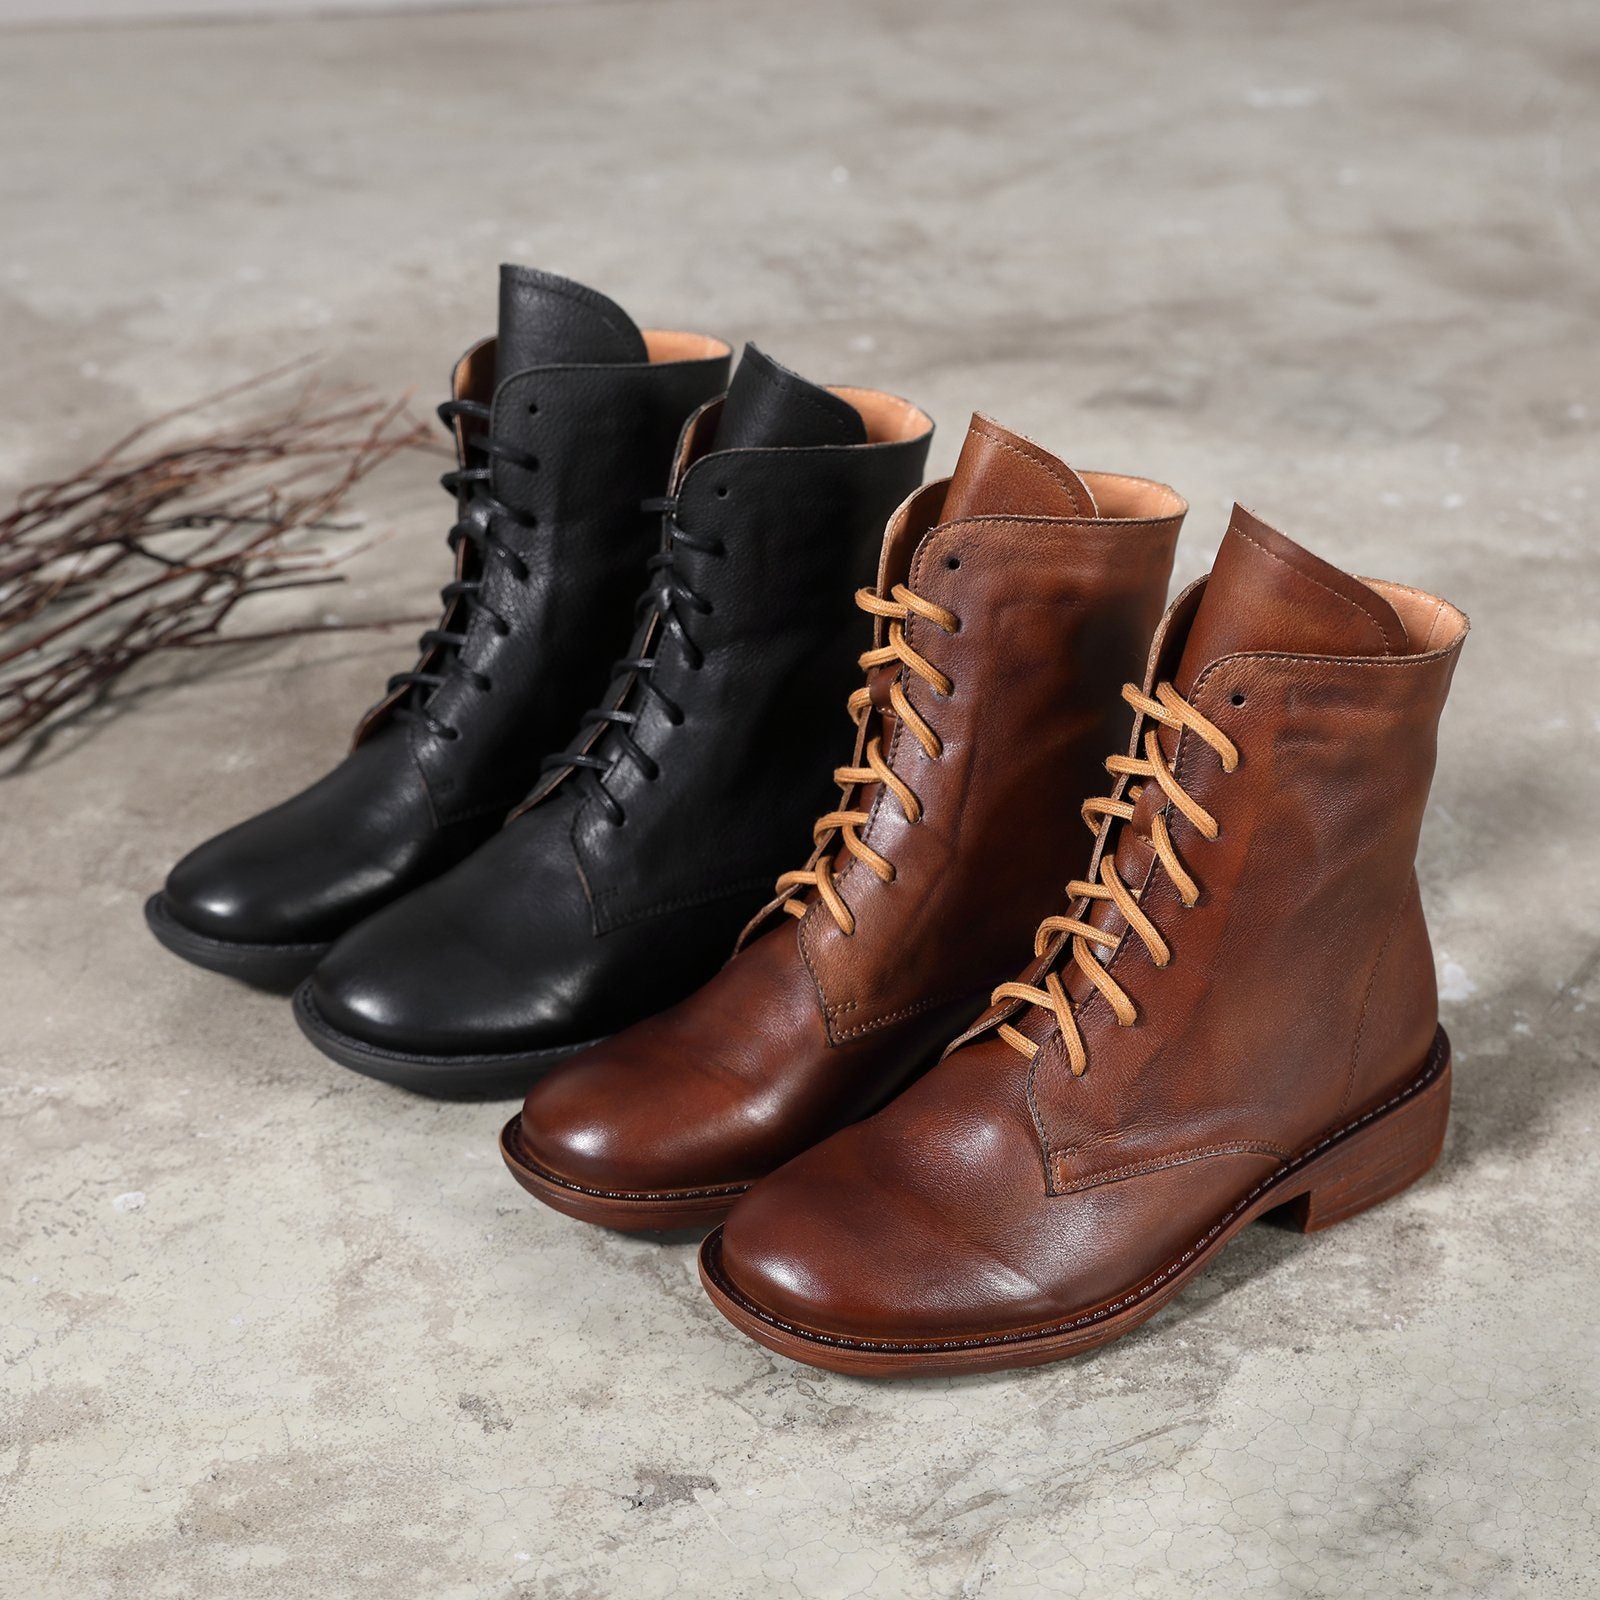 Winter Boots Handmade Genuine Leather Lace-Up Combat Boots Retro Marti ...